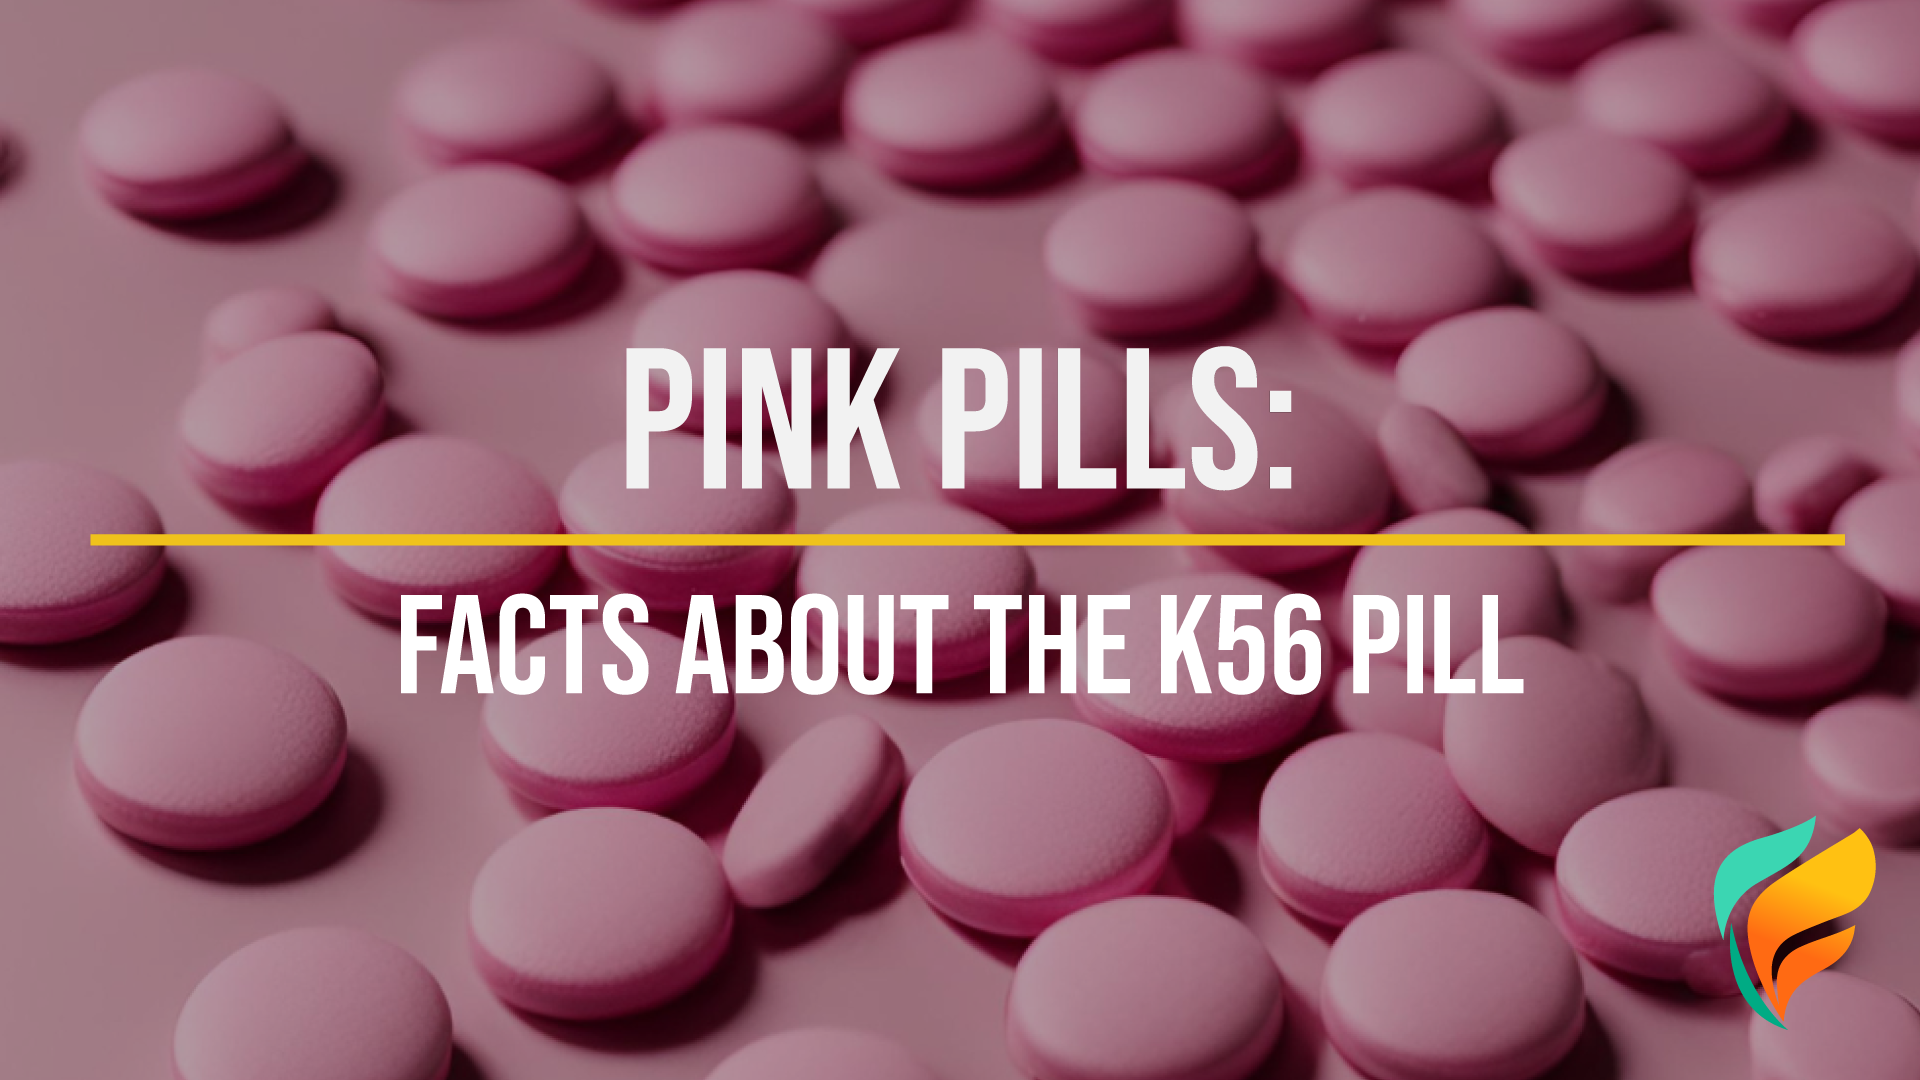 What is the Pink Pill?